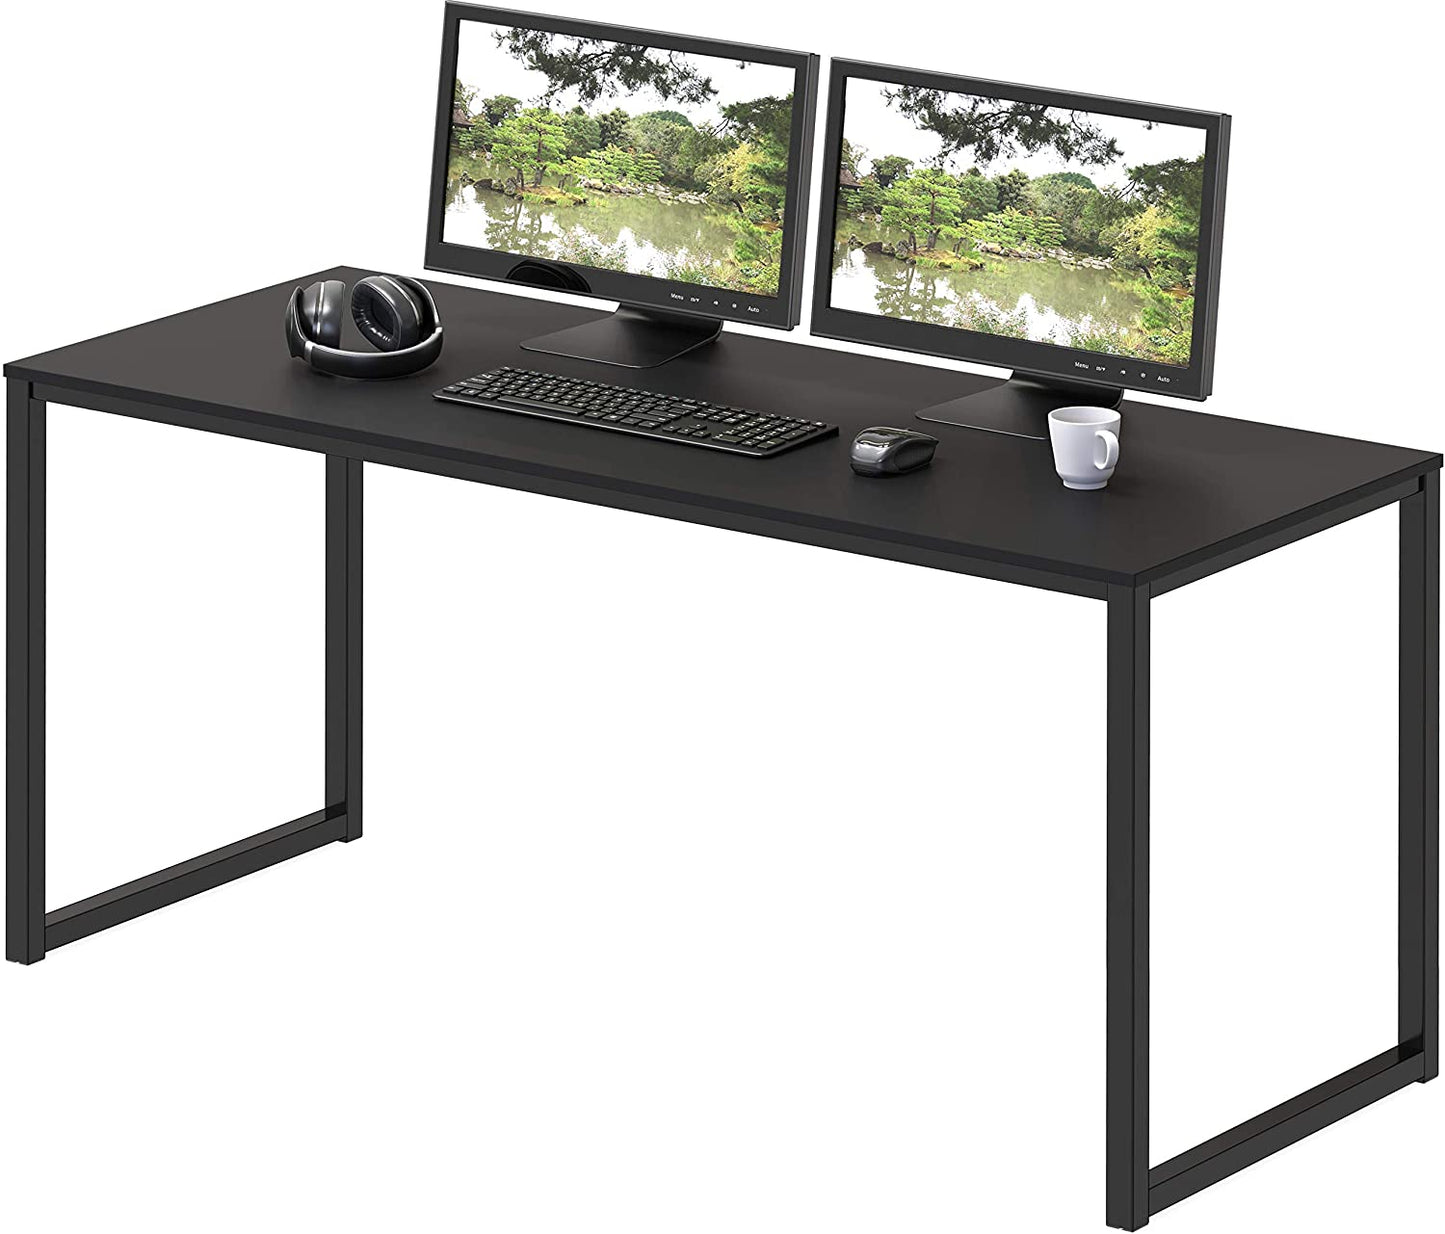 Study Table : Home Office 48-Inch Computer Desk & Study Table